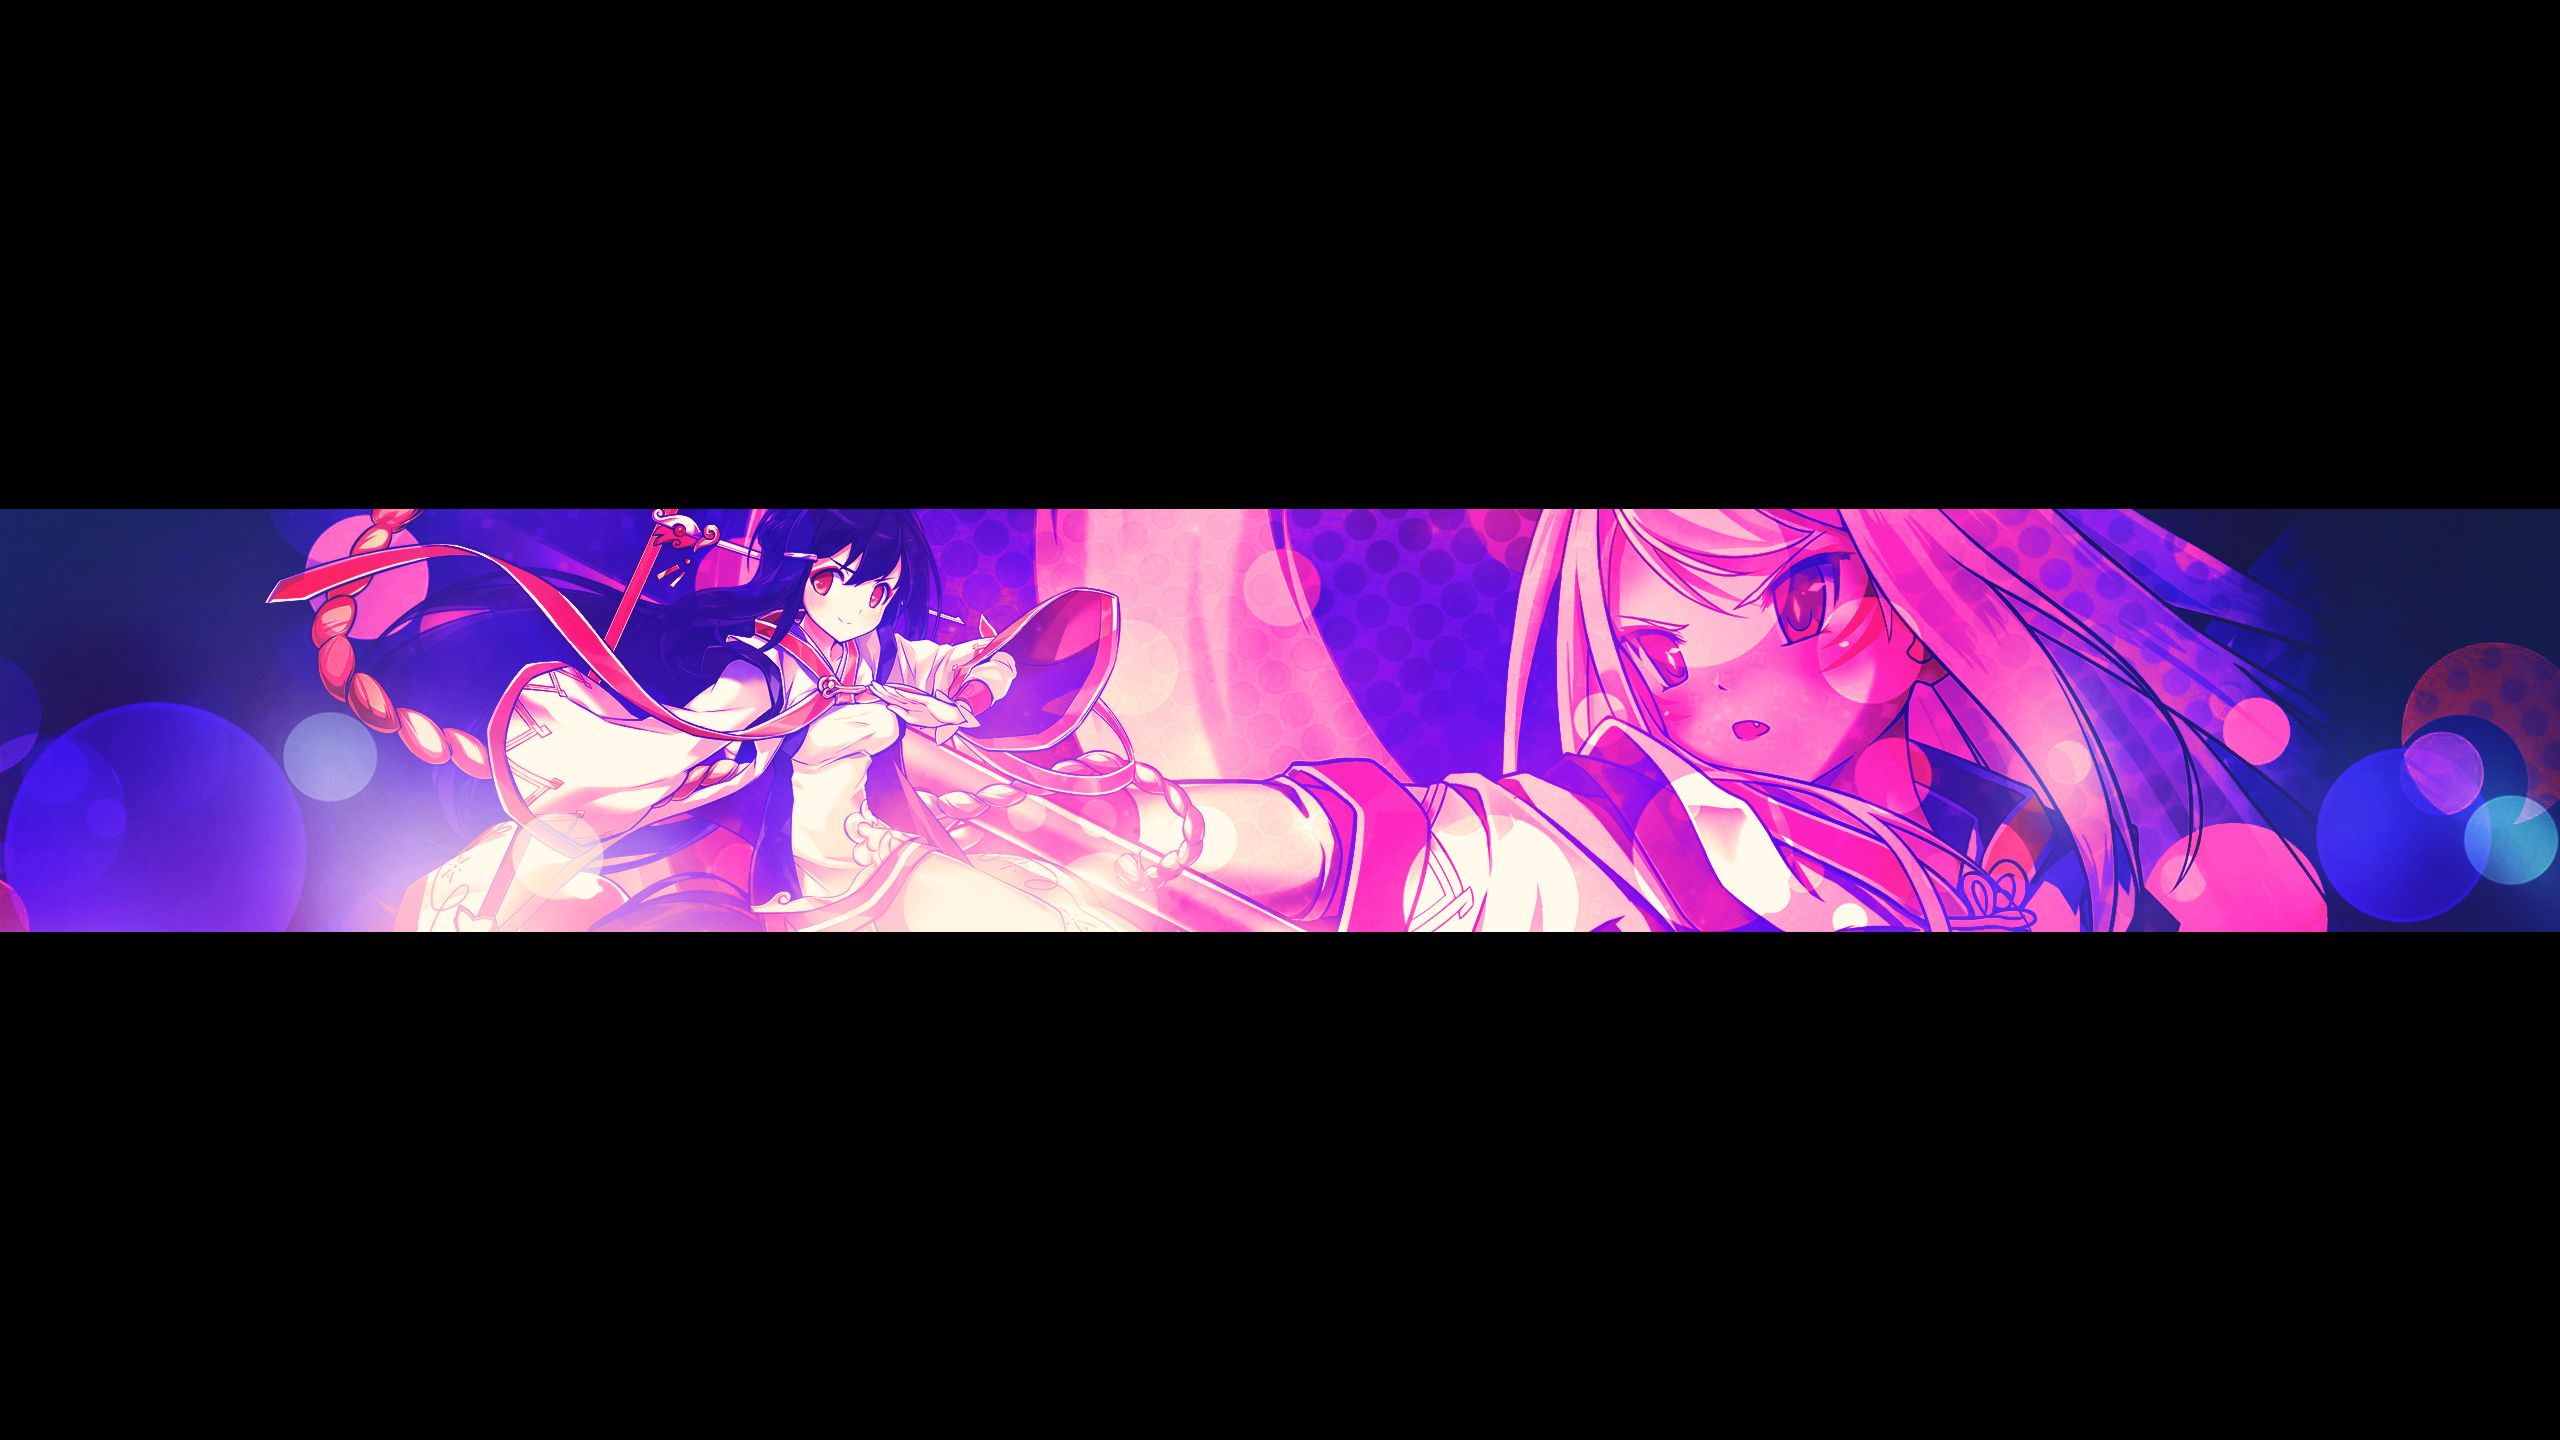 2560X1440 Banner Anime Wallpapers - Wallpaper Cave. 